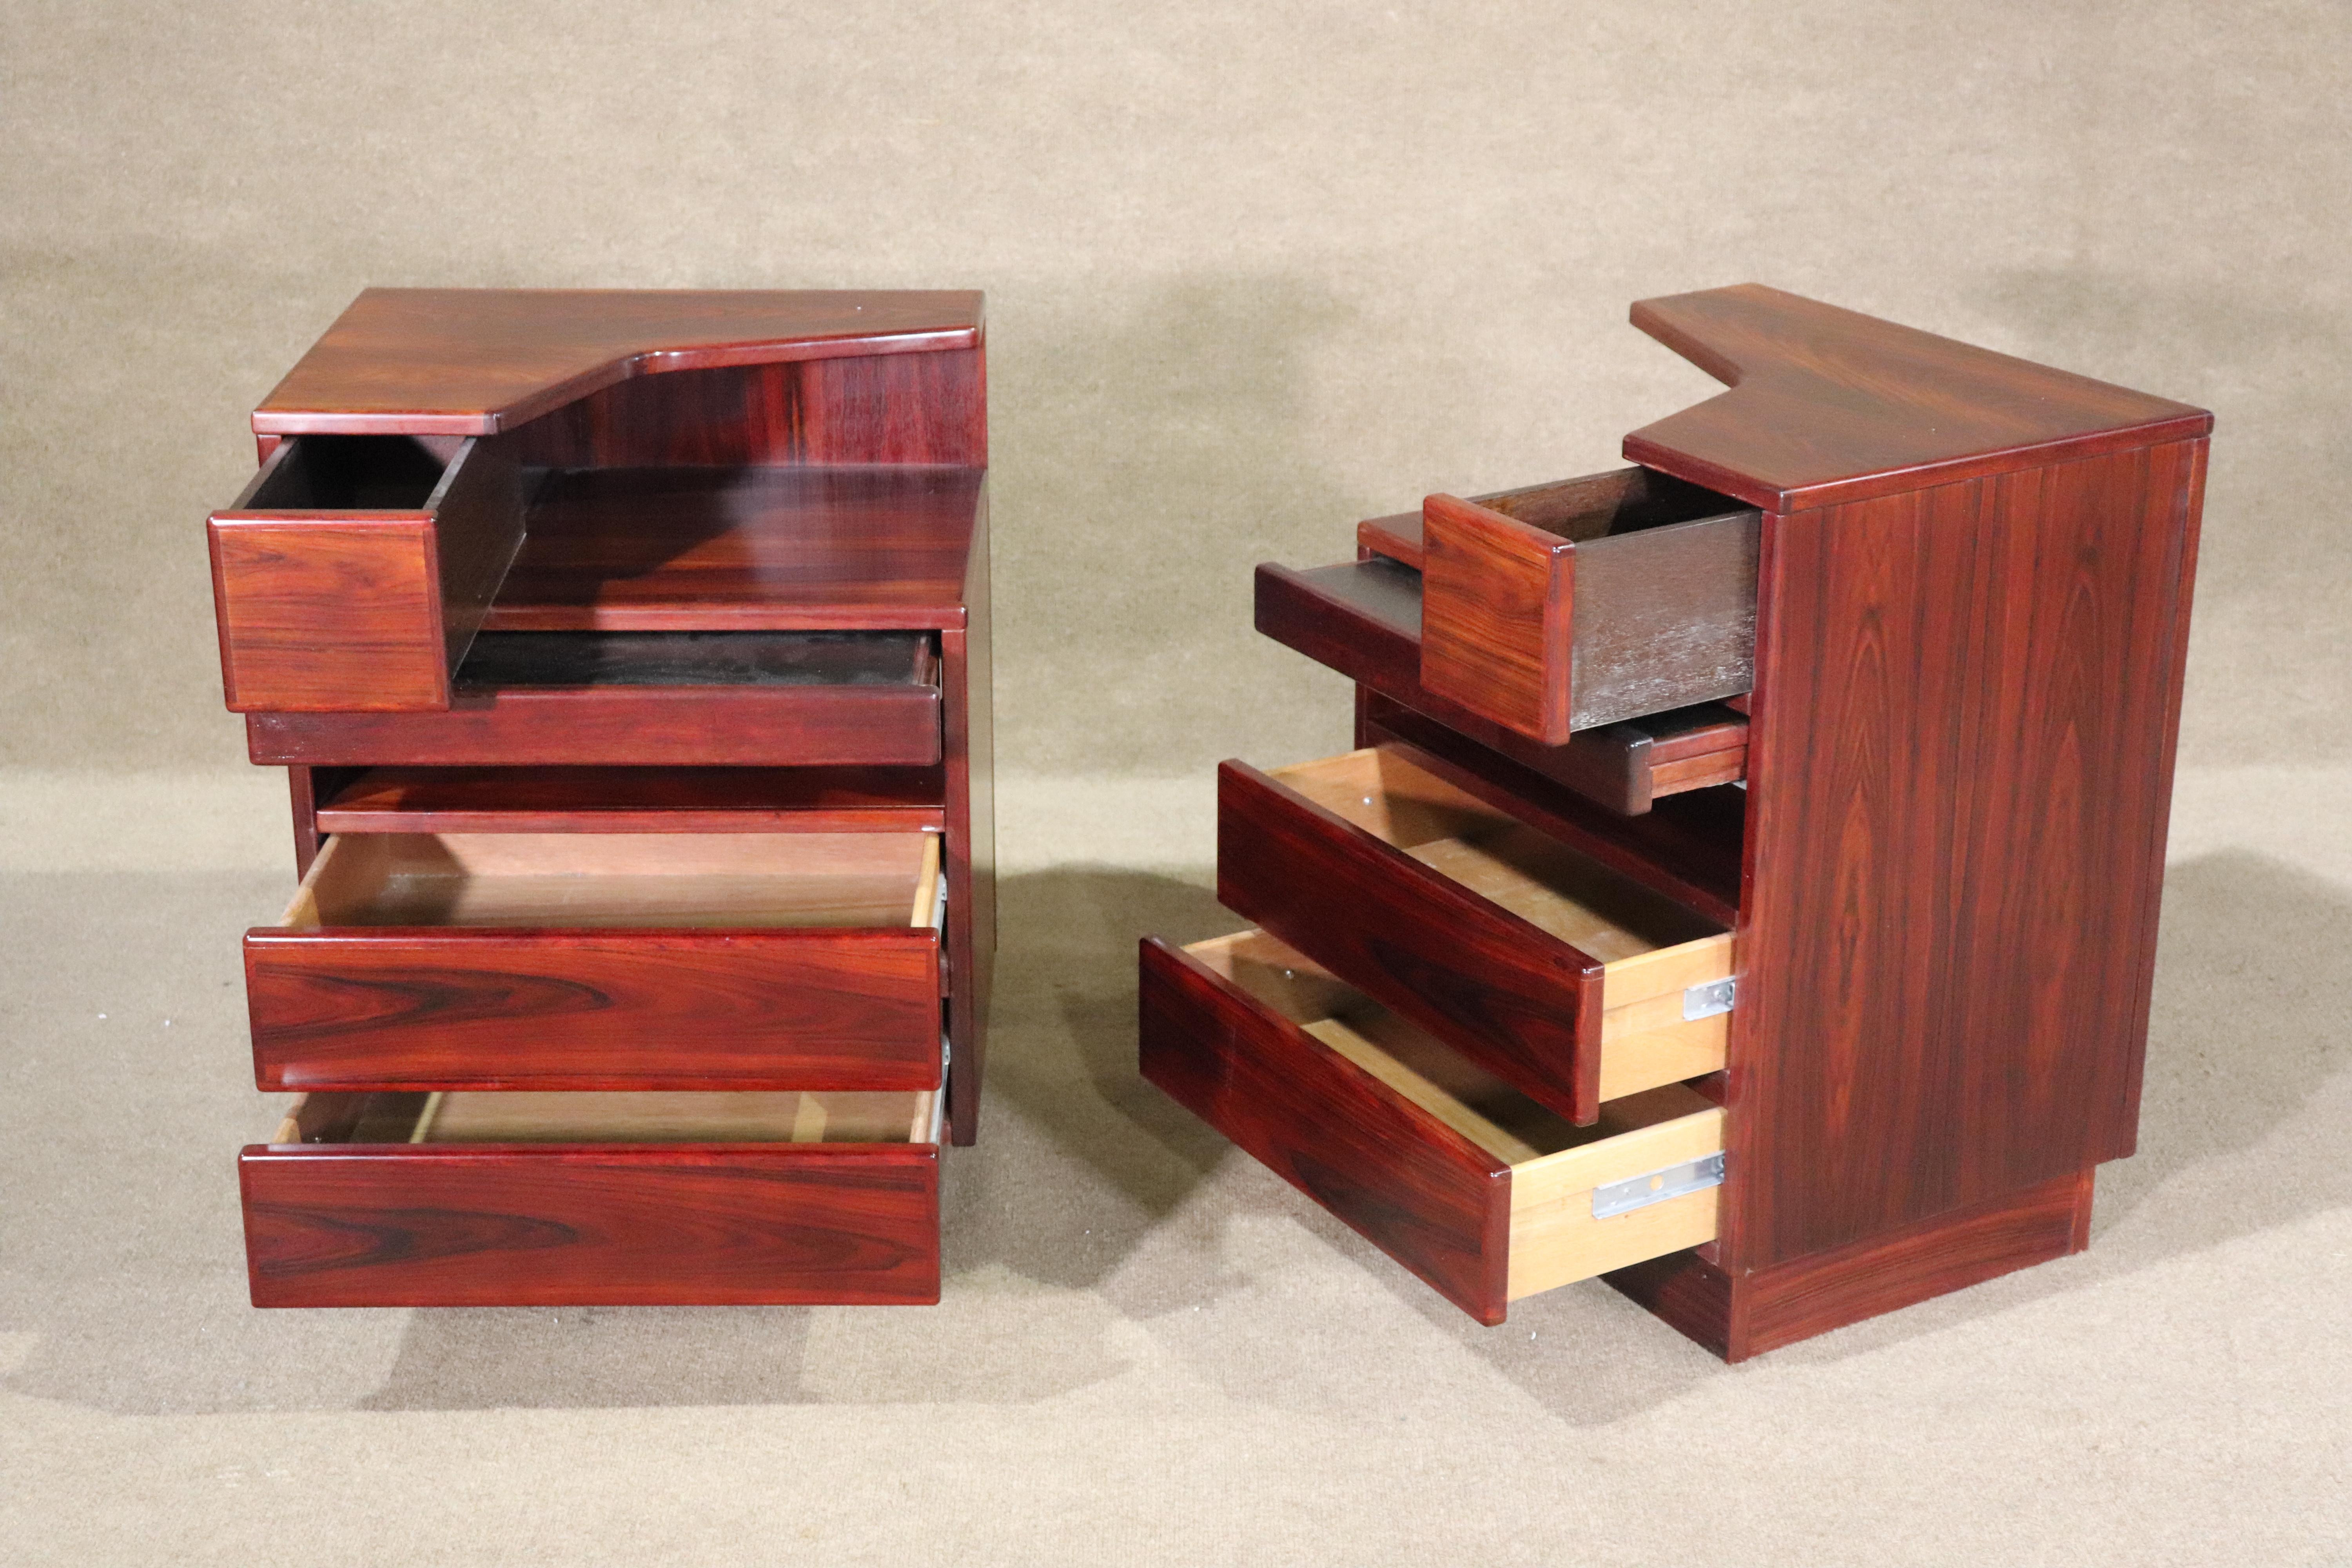 Vintage Danish side tables by Scan Coll. Rich rosewood grain throughout, with various storage compartments.
Please confirm location NY or NJ